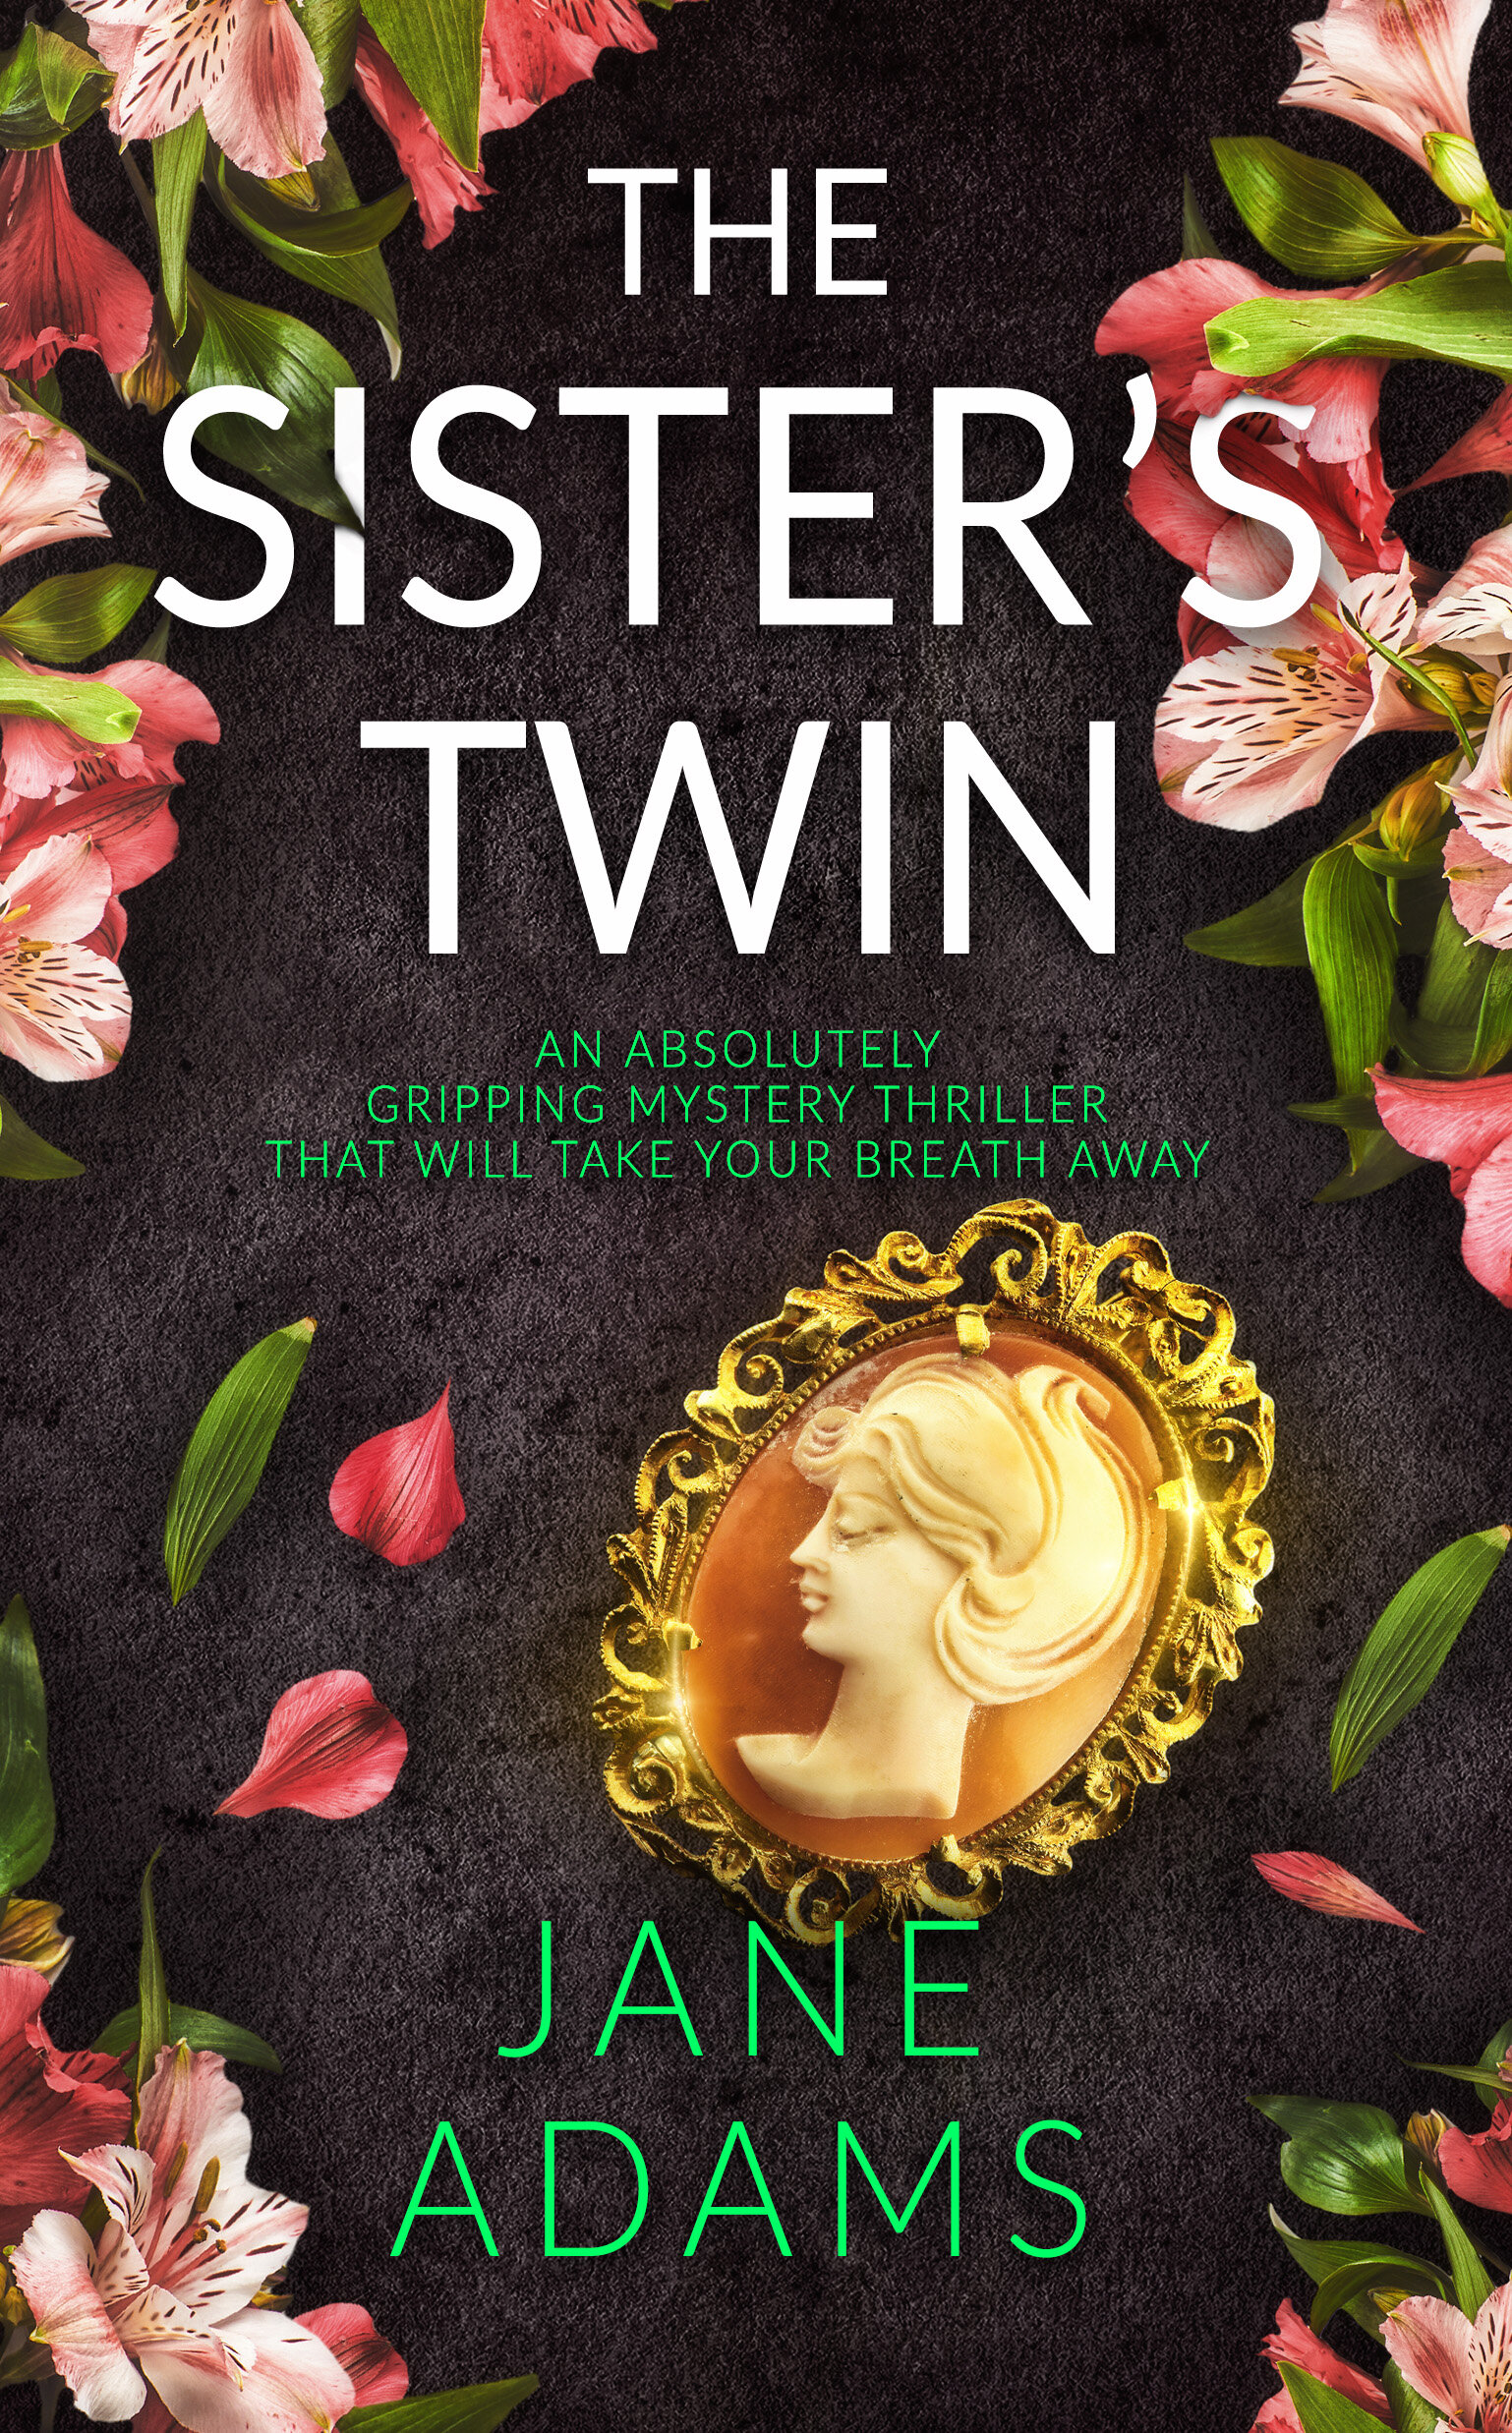 THE SISTER'S TWIN Publish.jpg